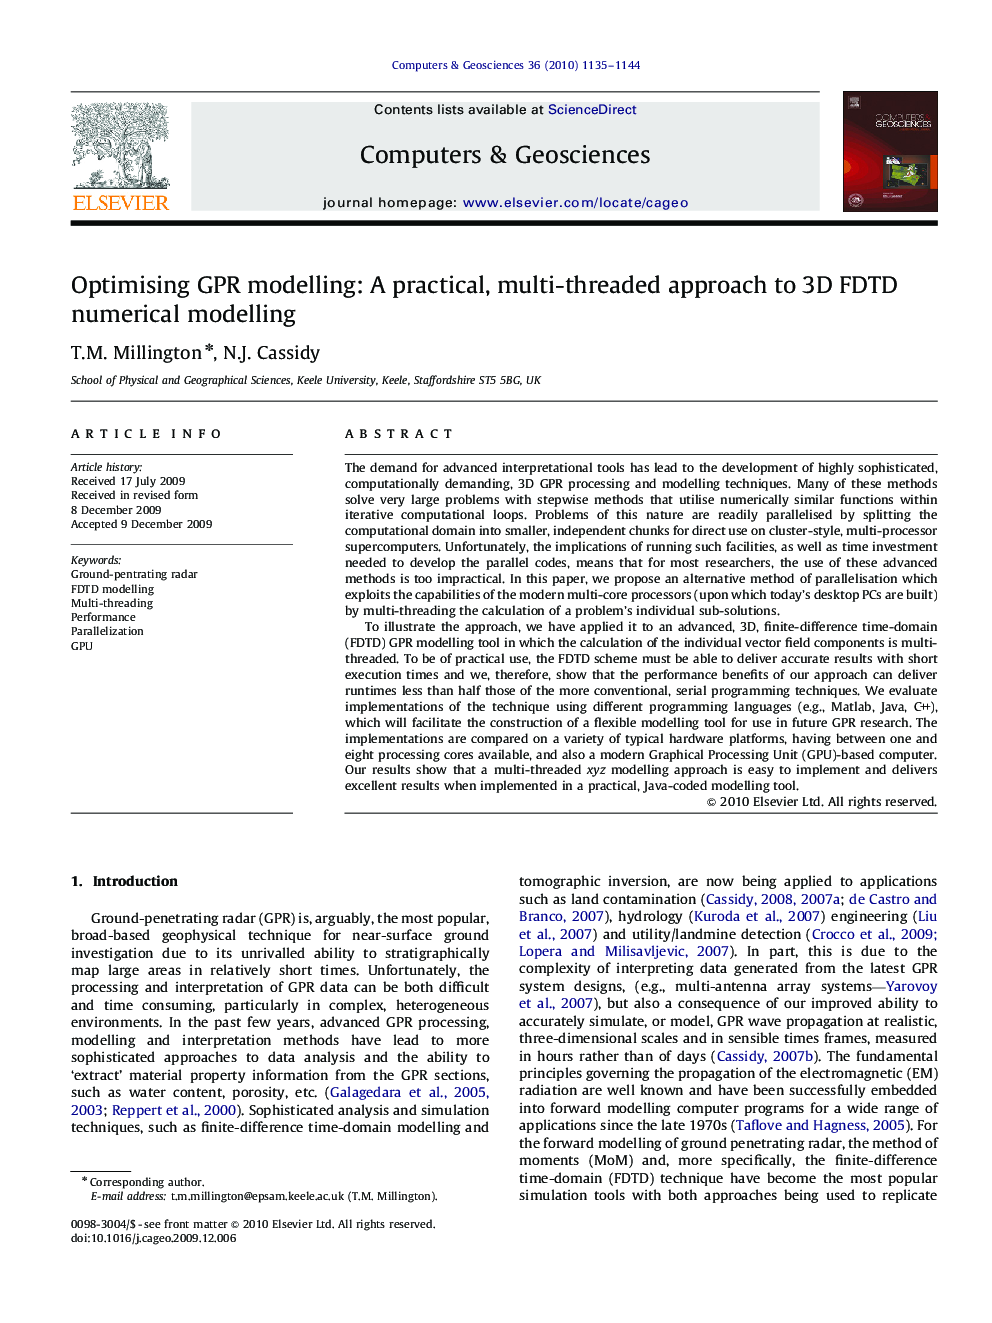 Optimising GPR modelling: A practical, multi-threaded approach to 3D FDTD numerical modelling